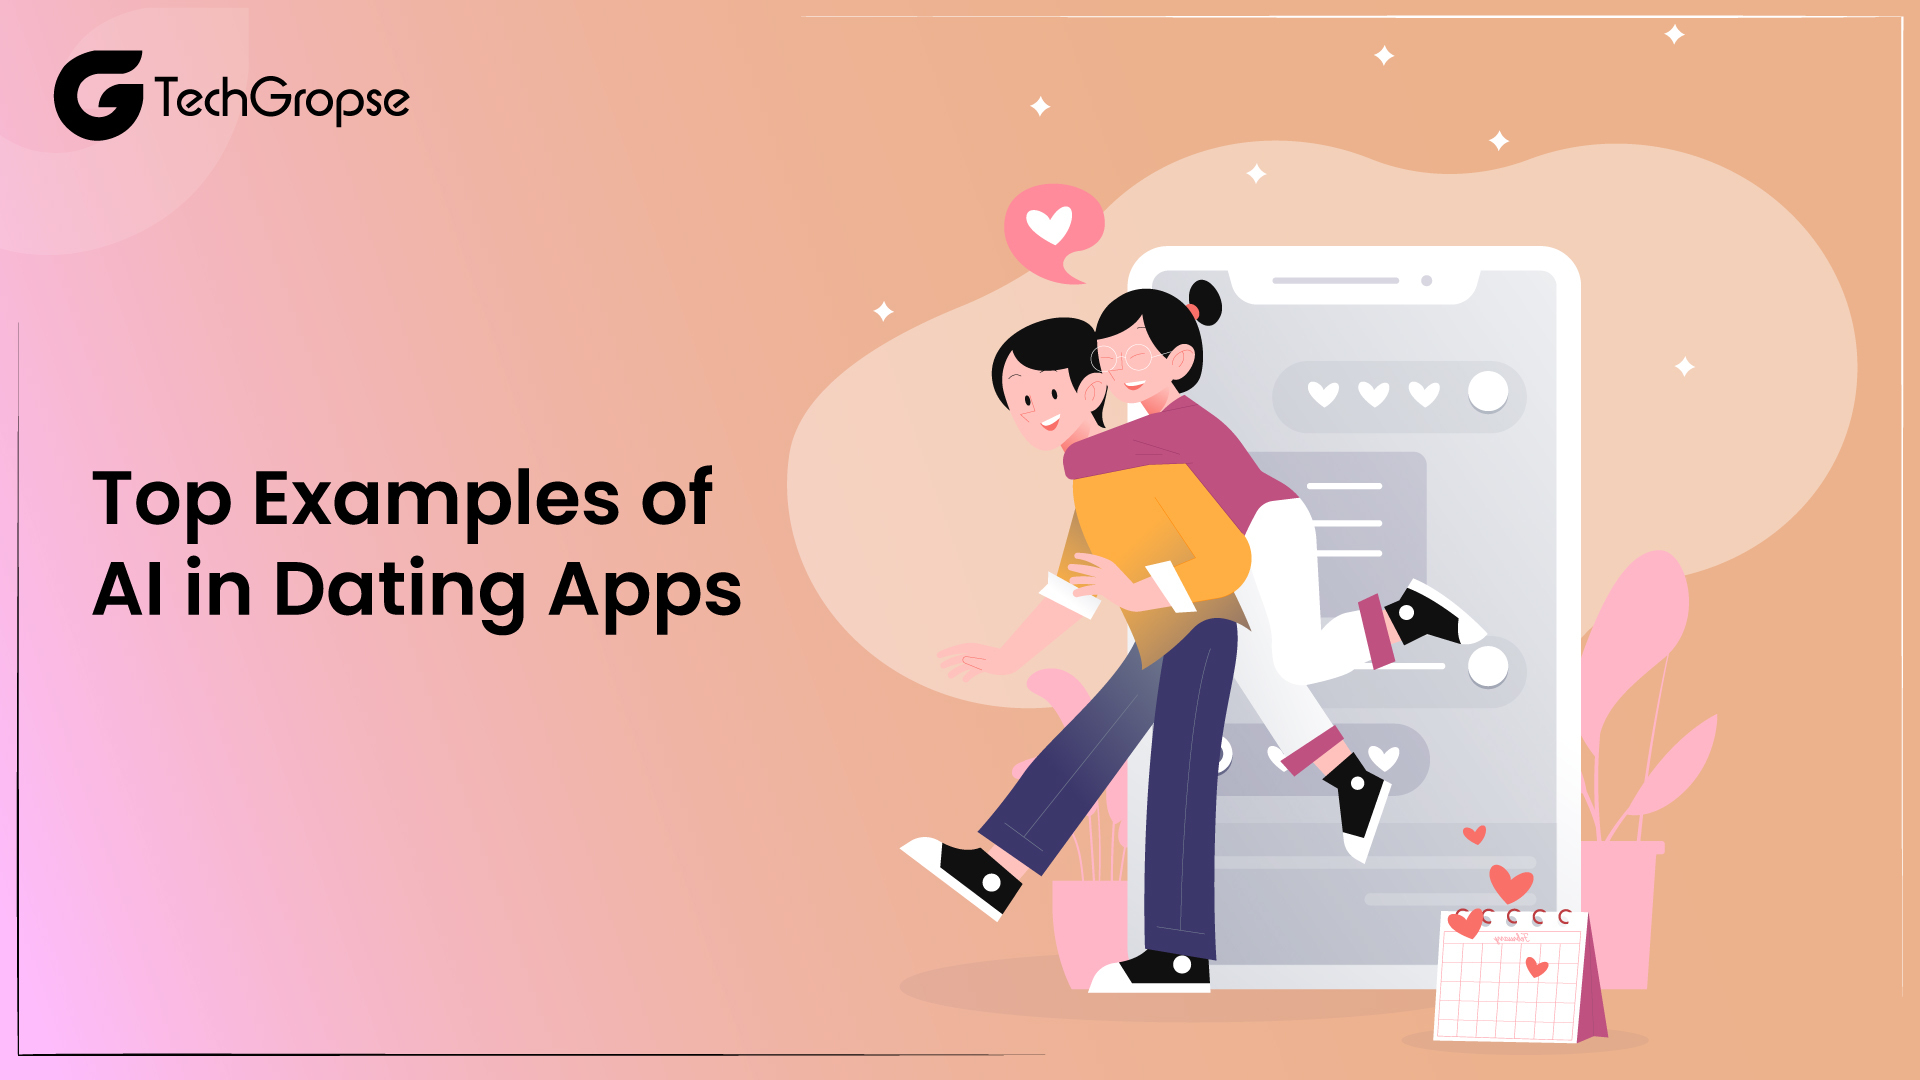 Top Examples of AI in Dating Apps